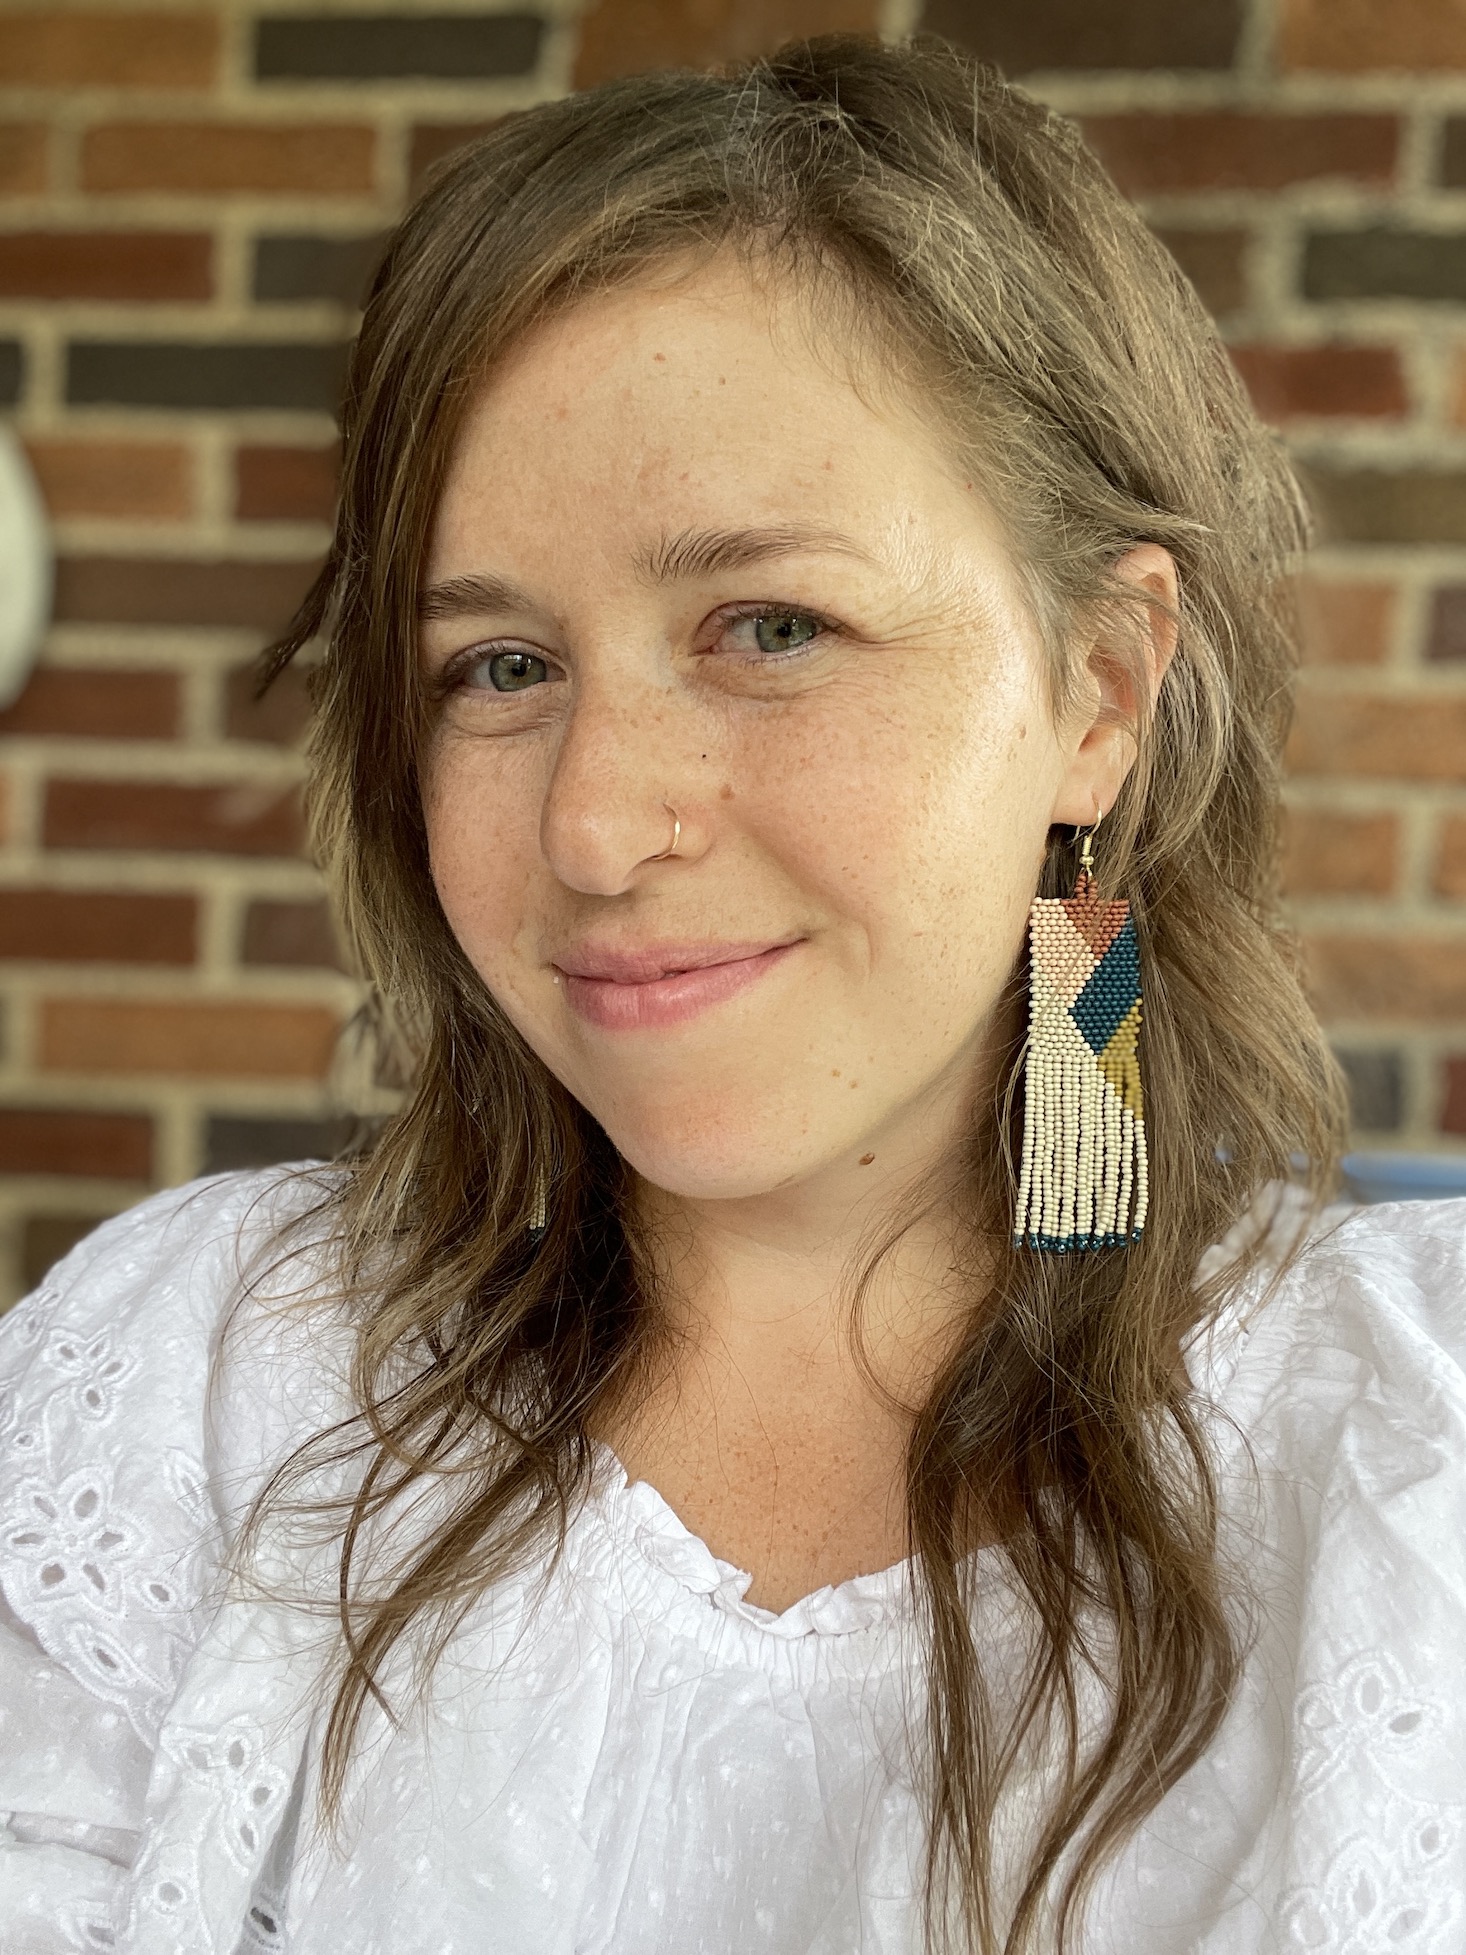 INK+ALLOY Insider Subscription seed bead earrings on the reviewer